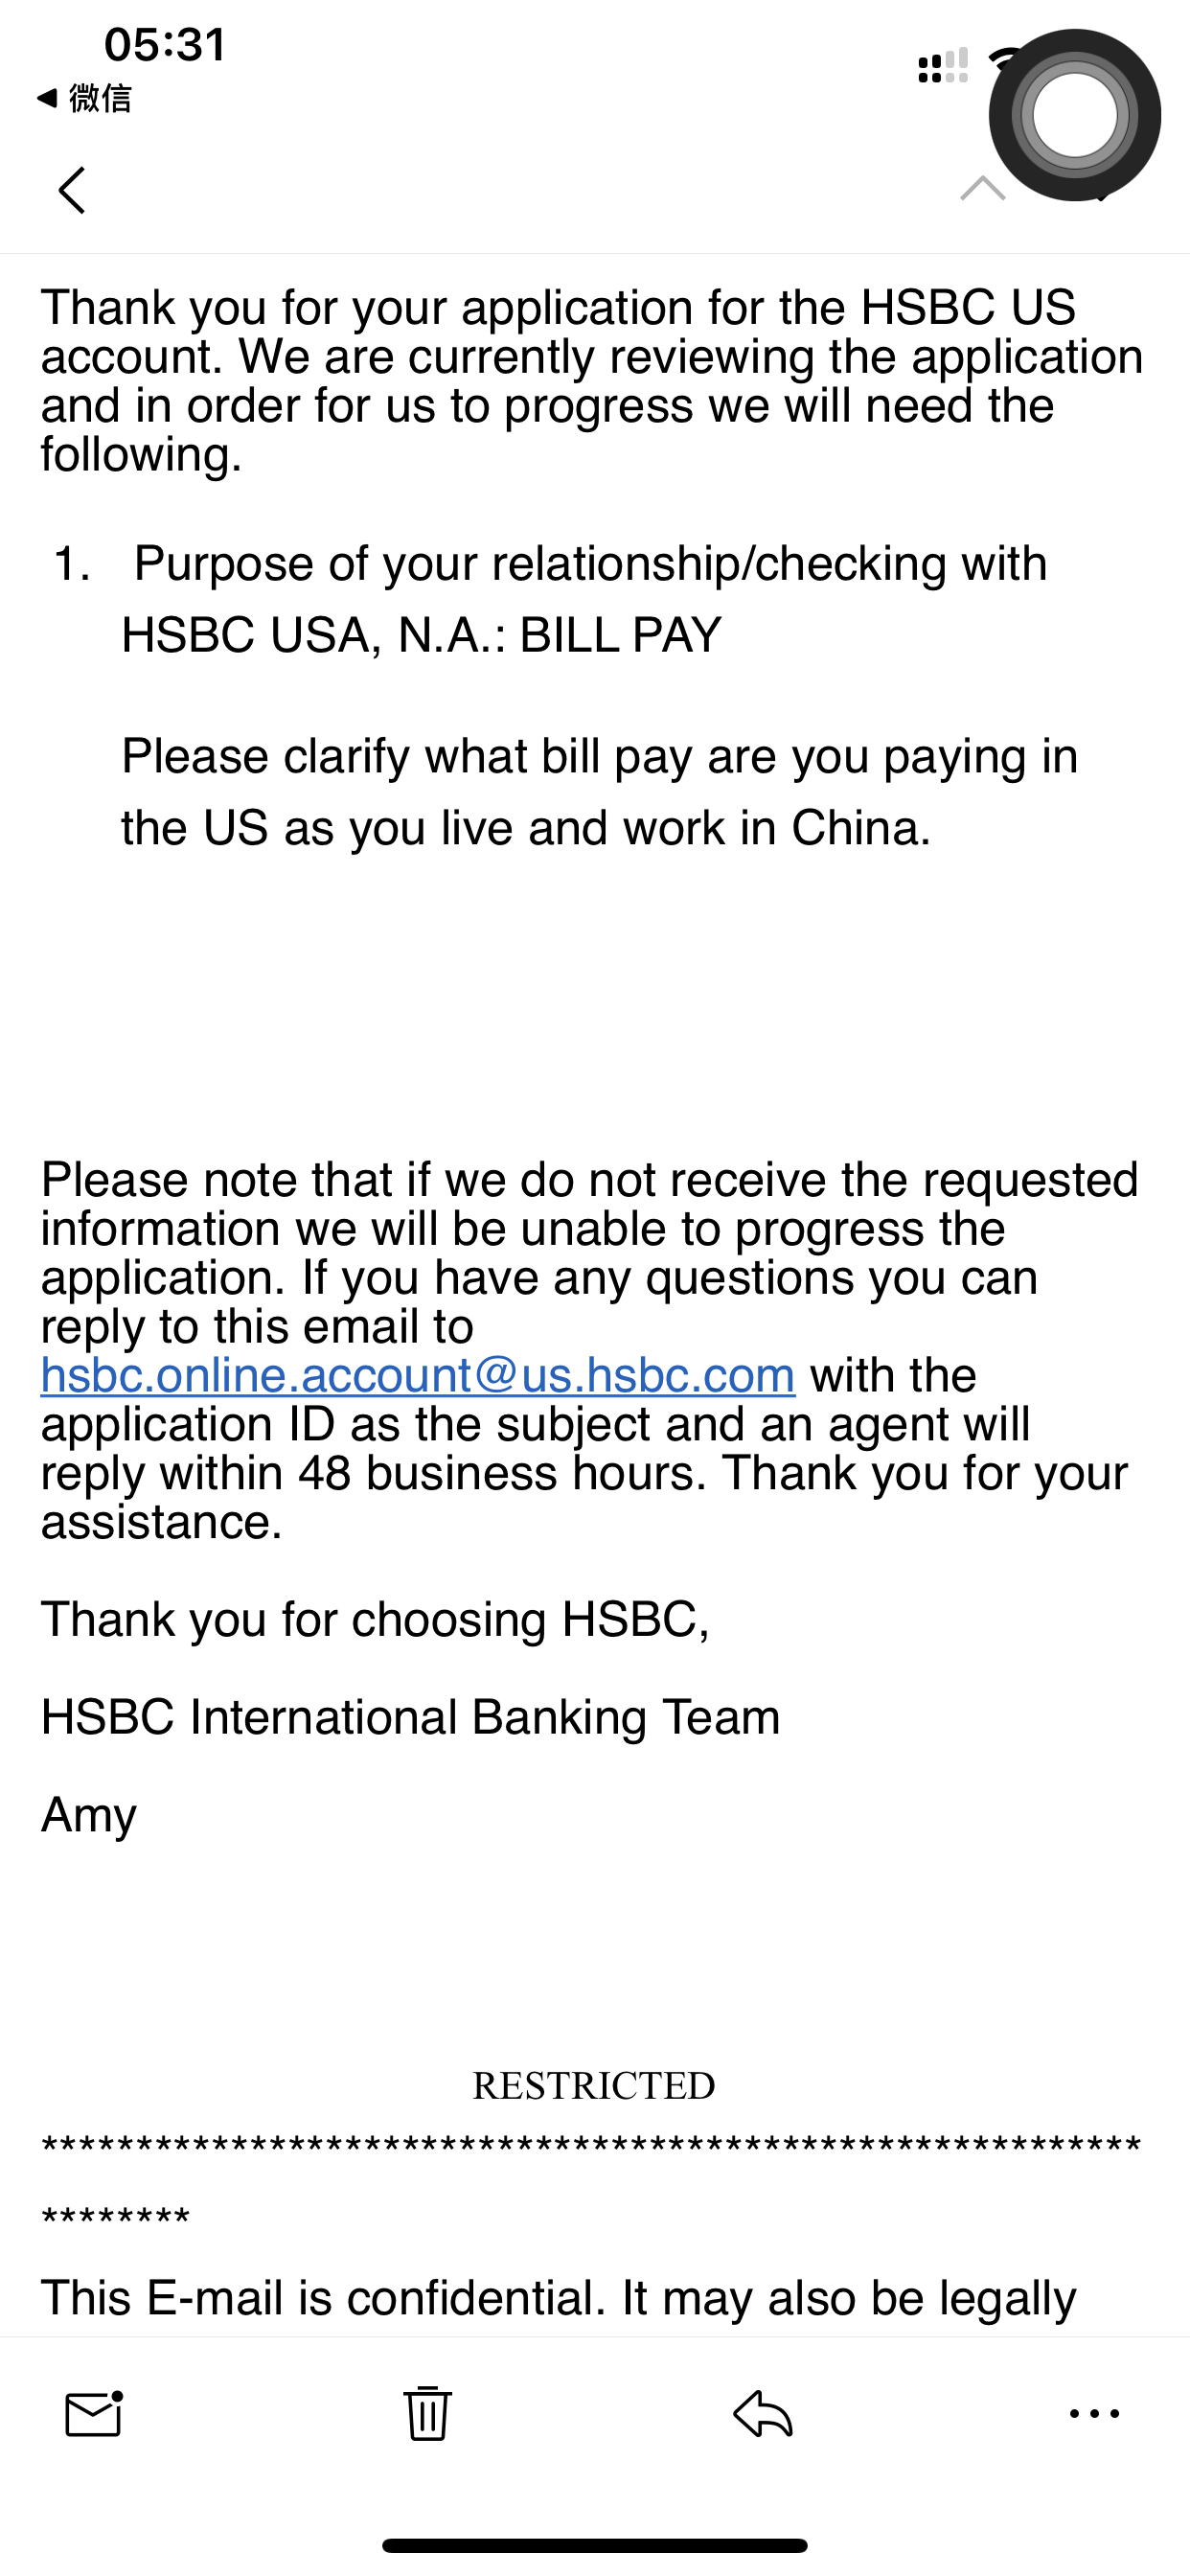 Please clarify what bill pay are you paying in the US as you live and work......